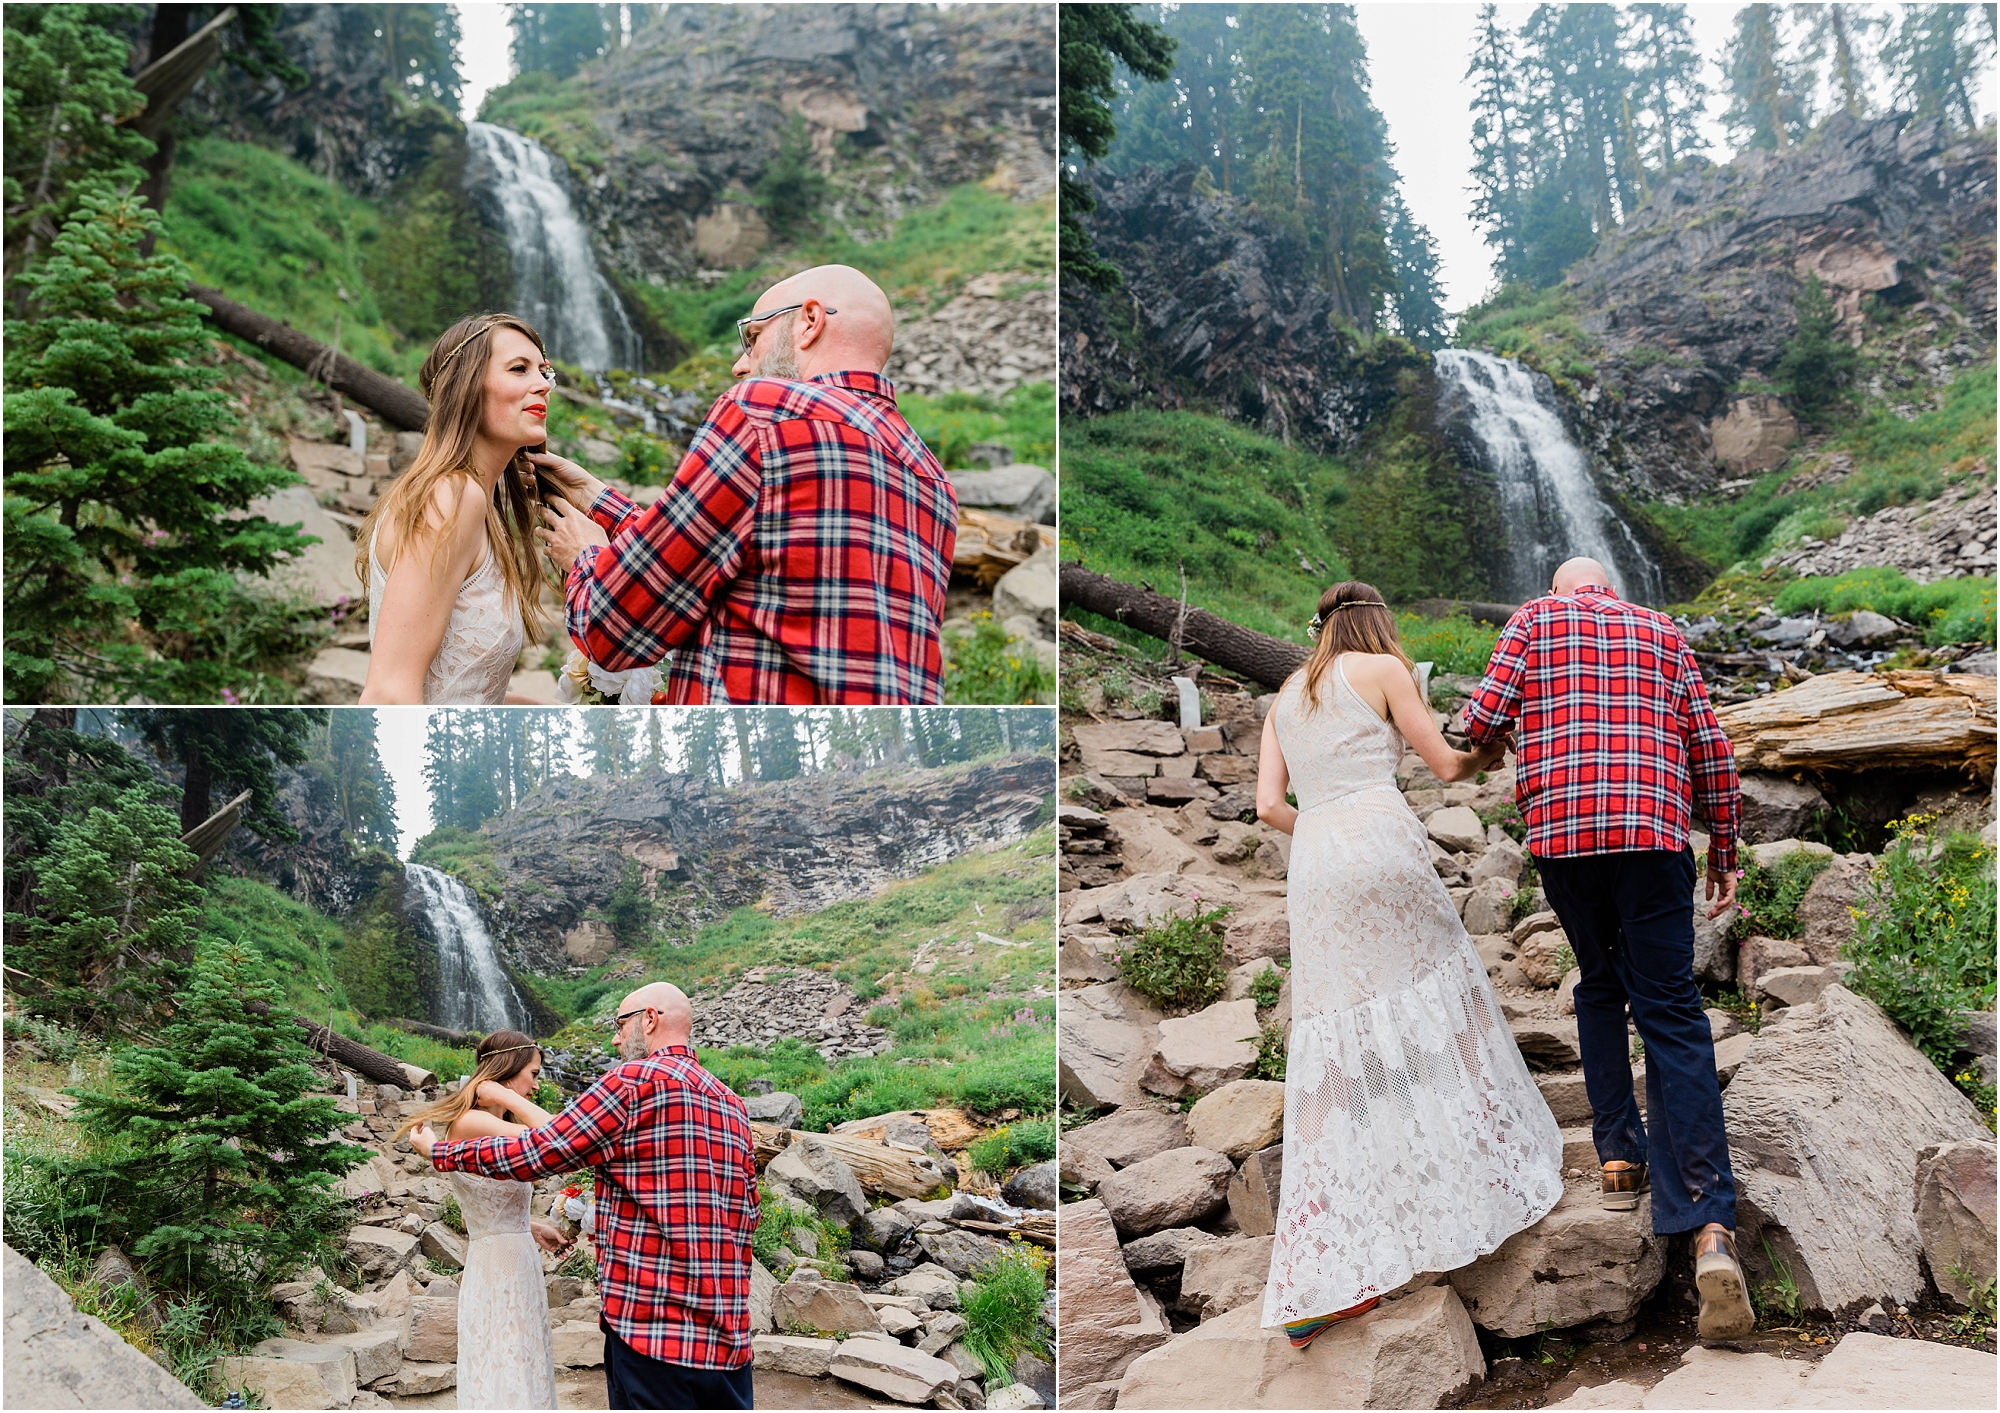 A wedding couple prepares for their ceremony at Plaikni Falls inside Crater Lake National Park in Oregon. | Erica Swantek Photography